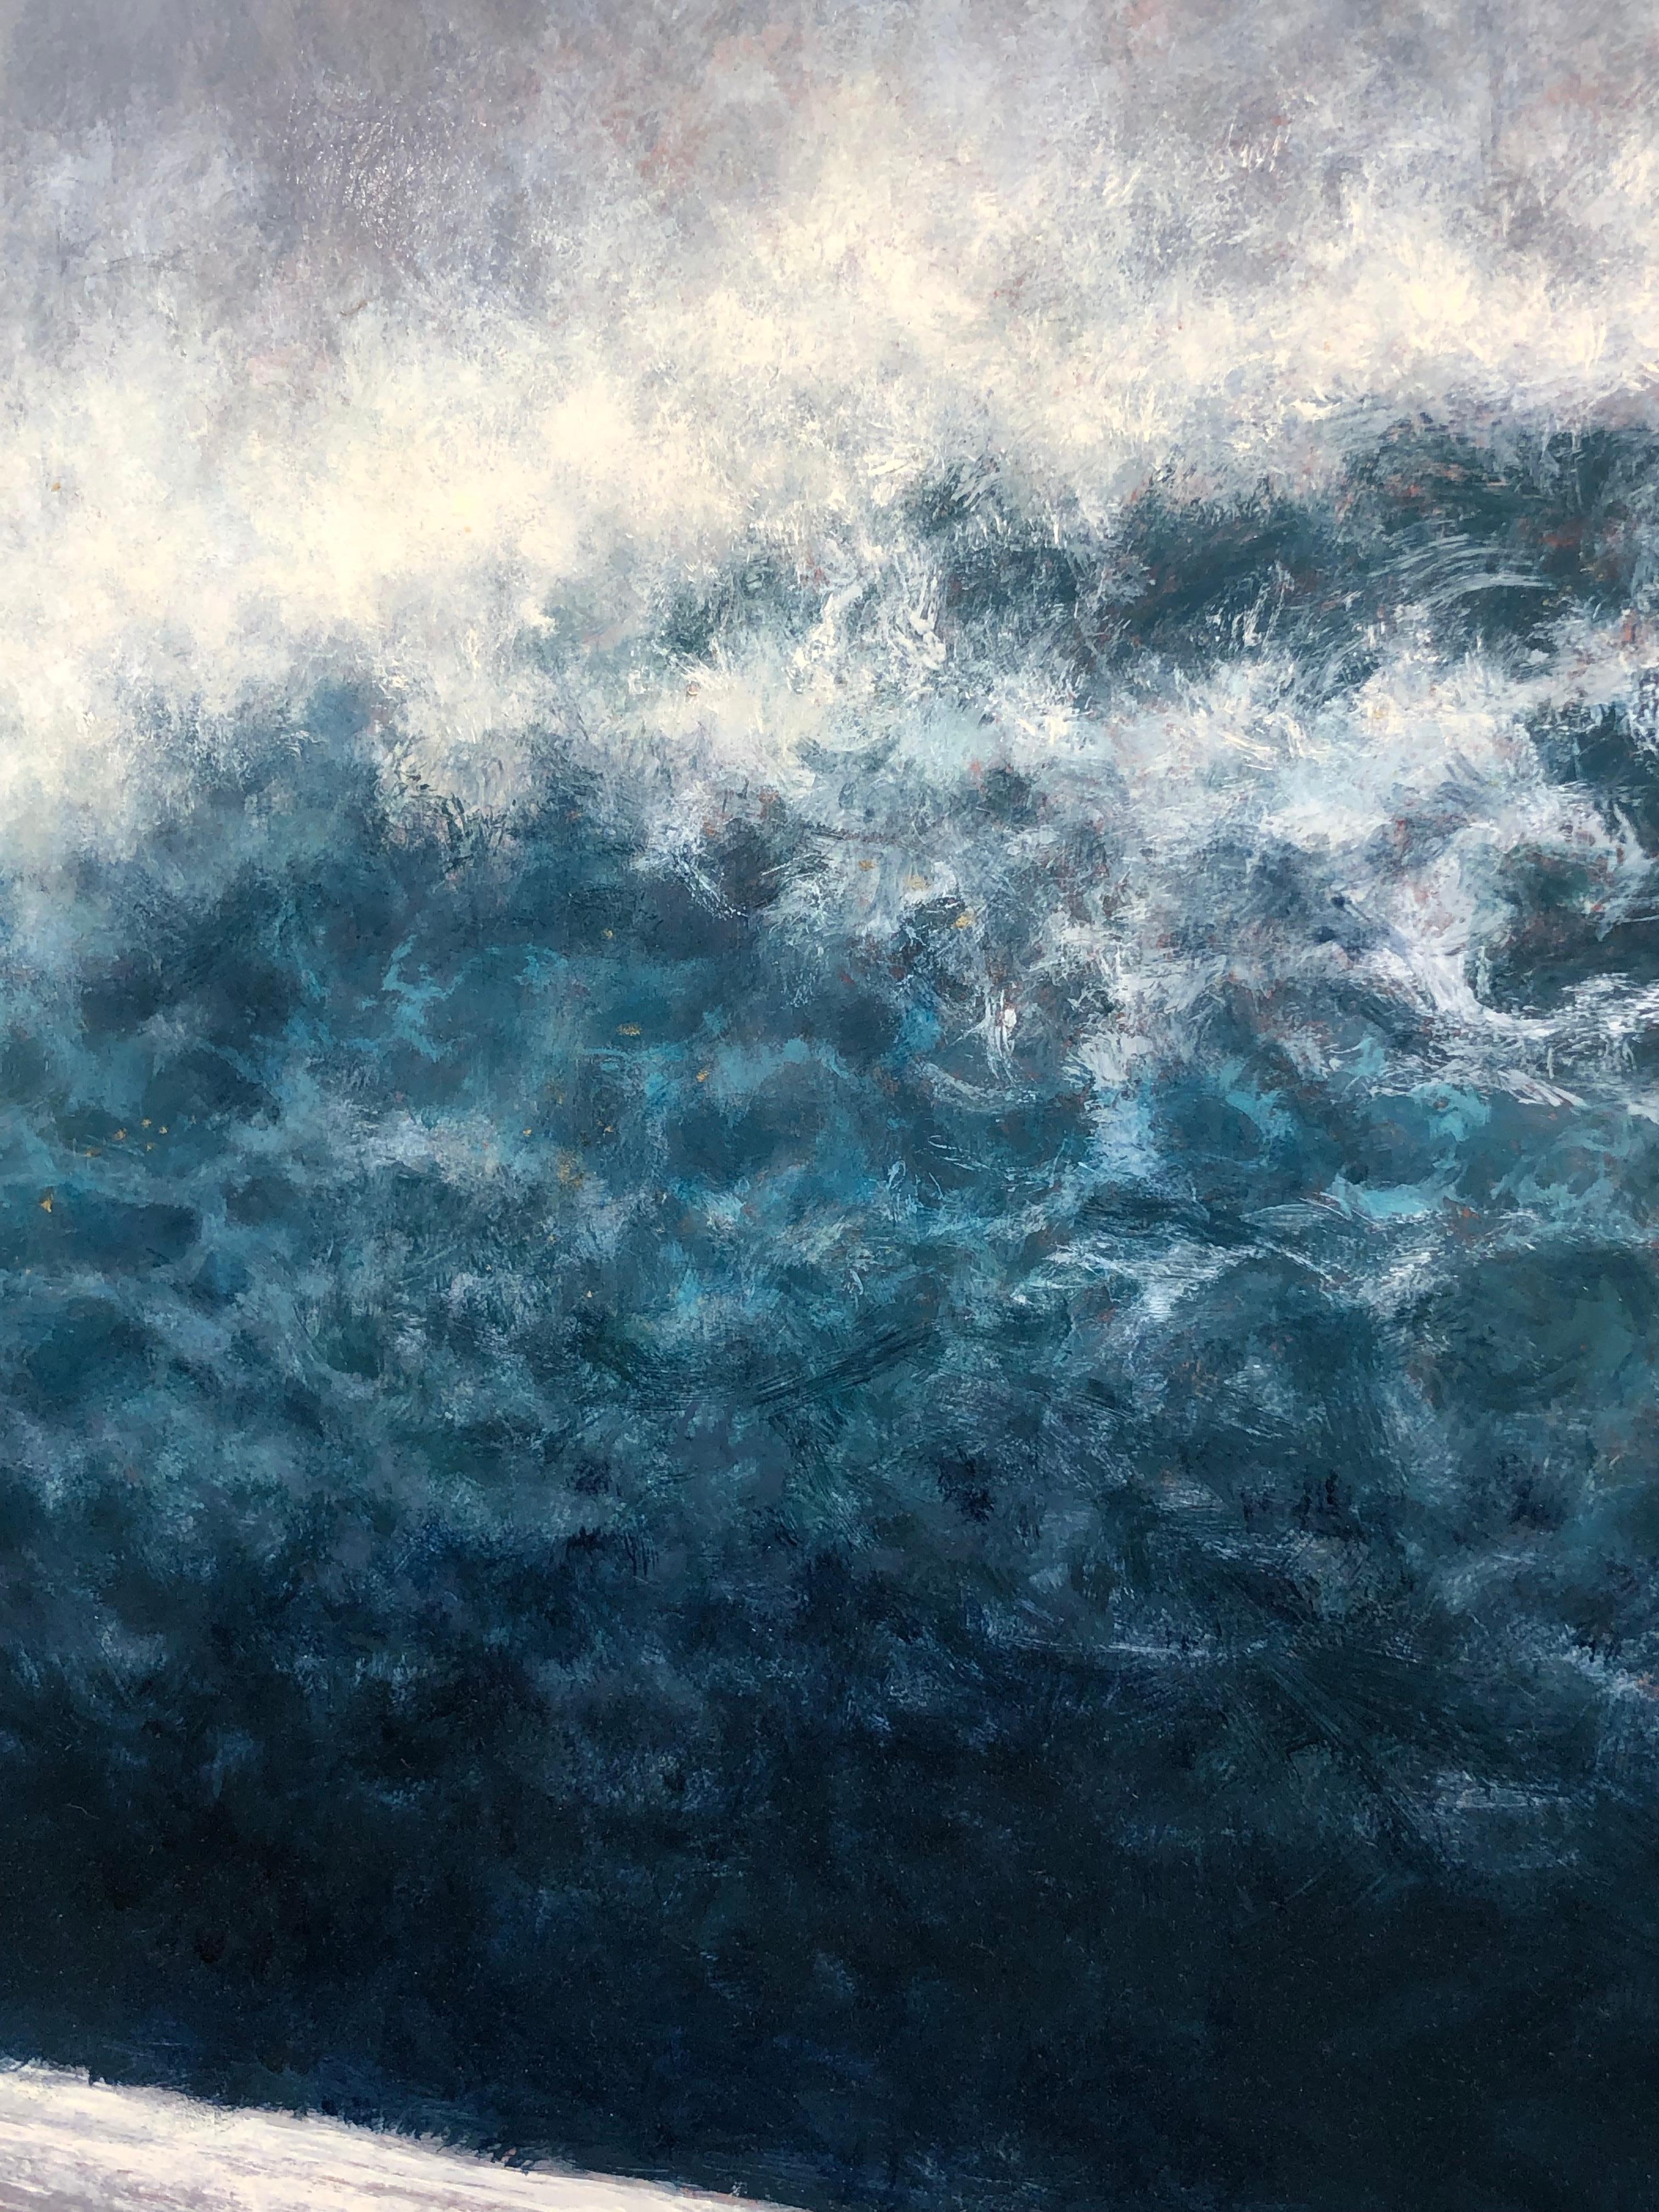 Wave, Kauai - Oil on Panel Painting in Blue Turquoise, White Sea Foam and Gray For Sale 5